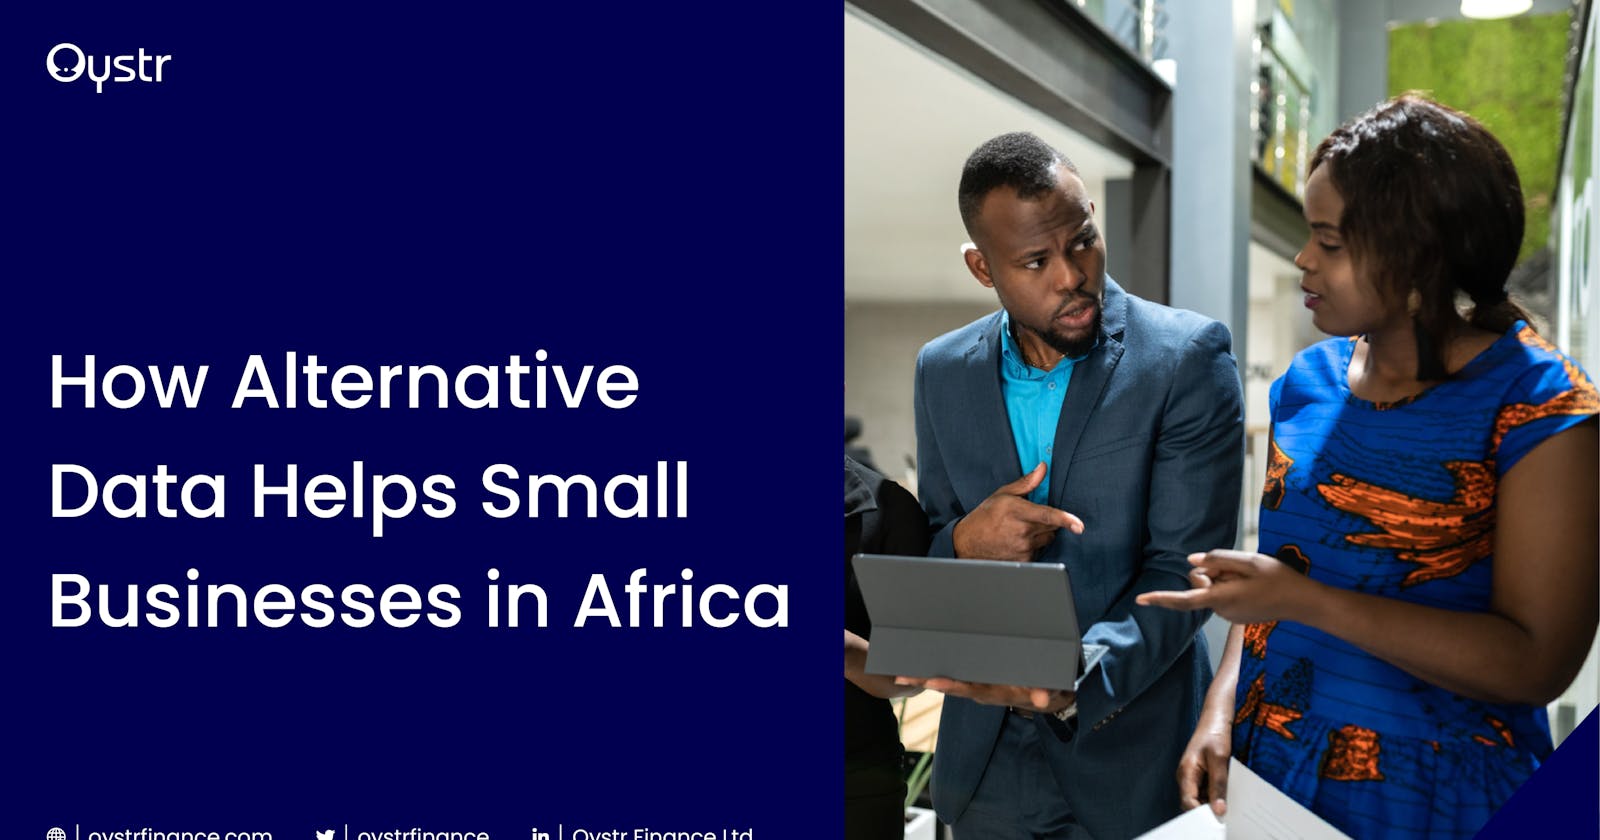 How Alternative Data Helps Small Businesses in Africa